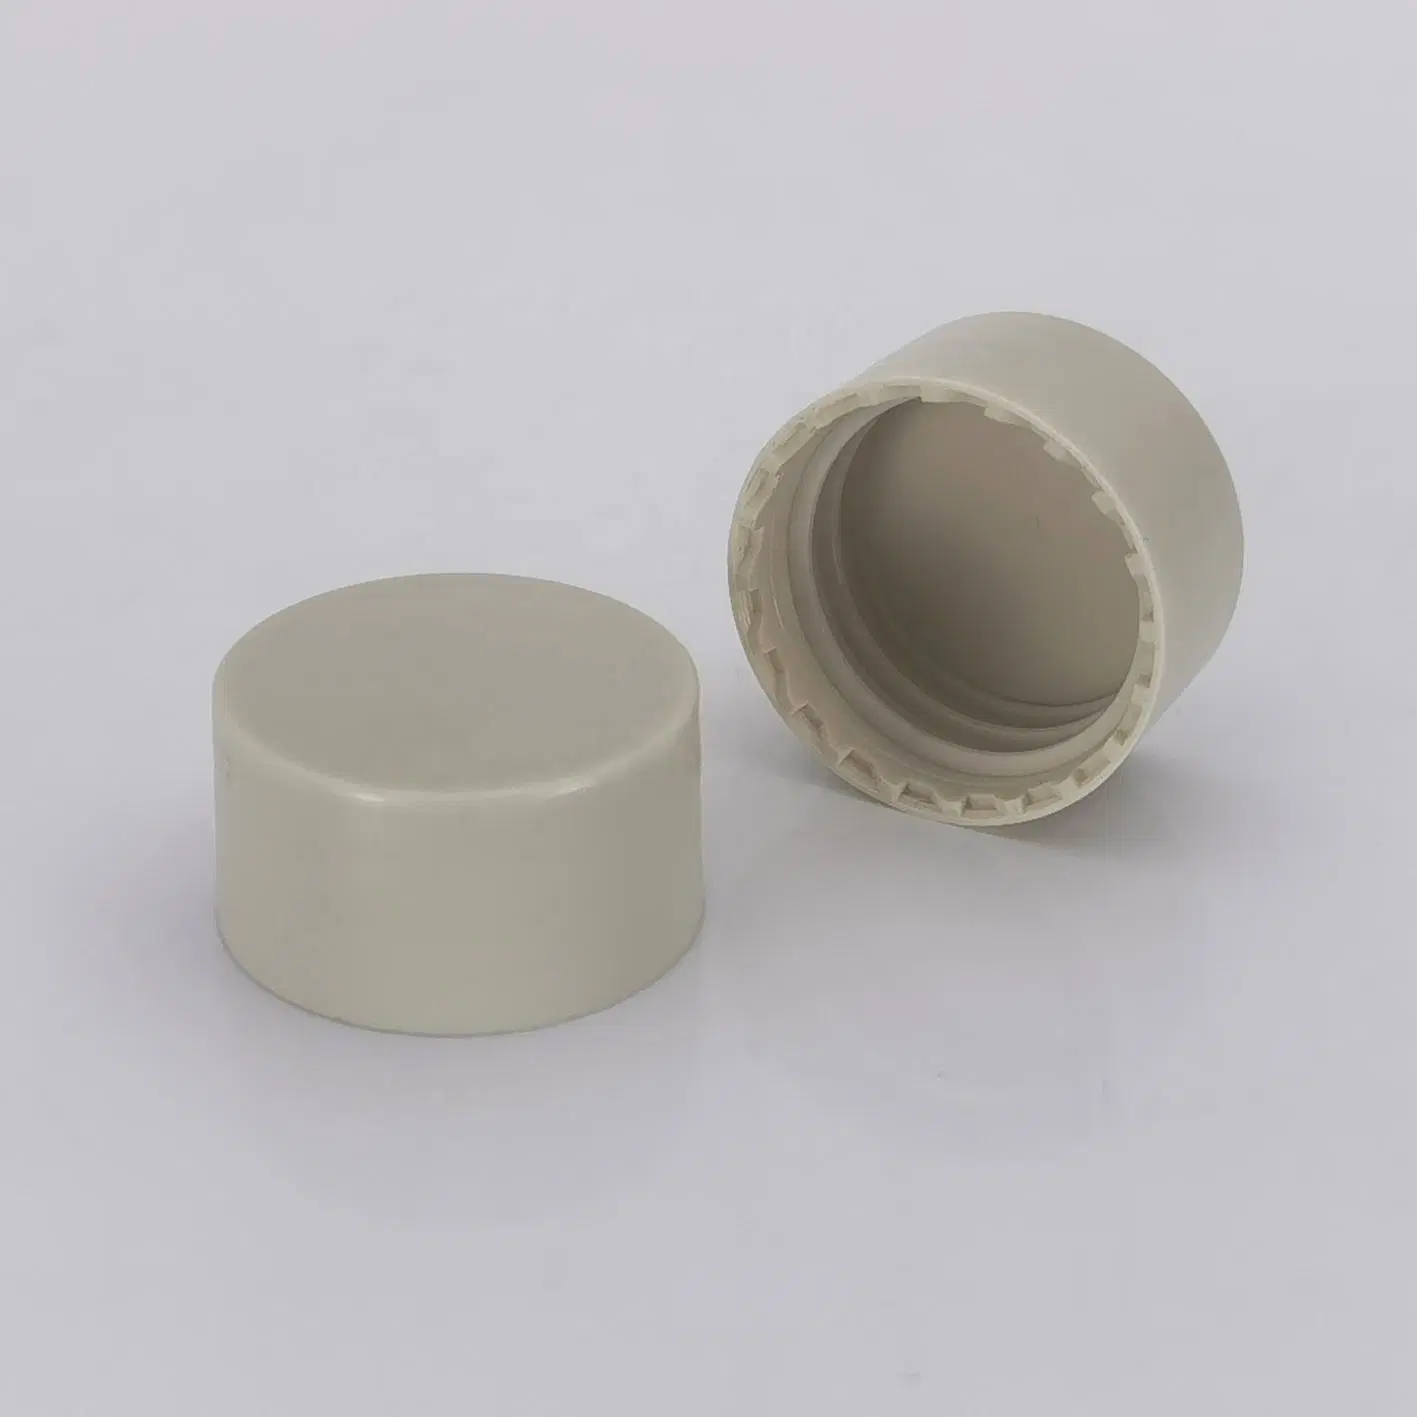 PP Plastic Small Bottle Cap 20-400 Screw Lid for Containers